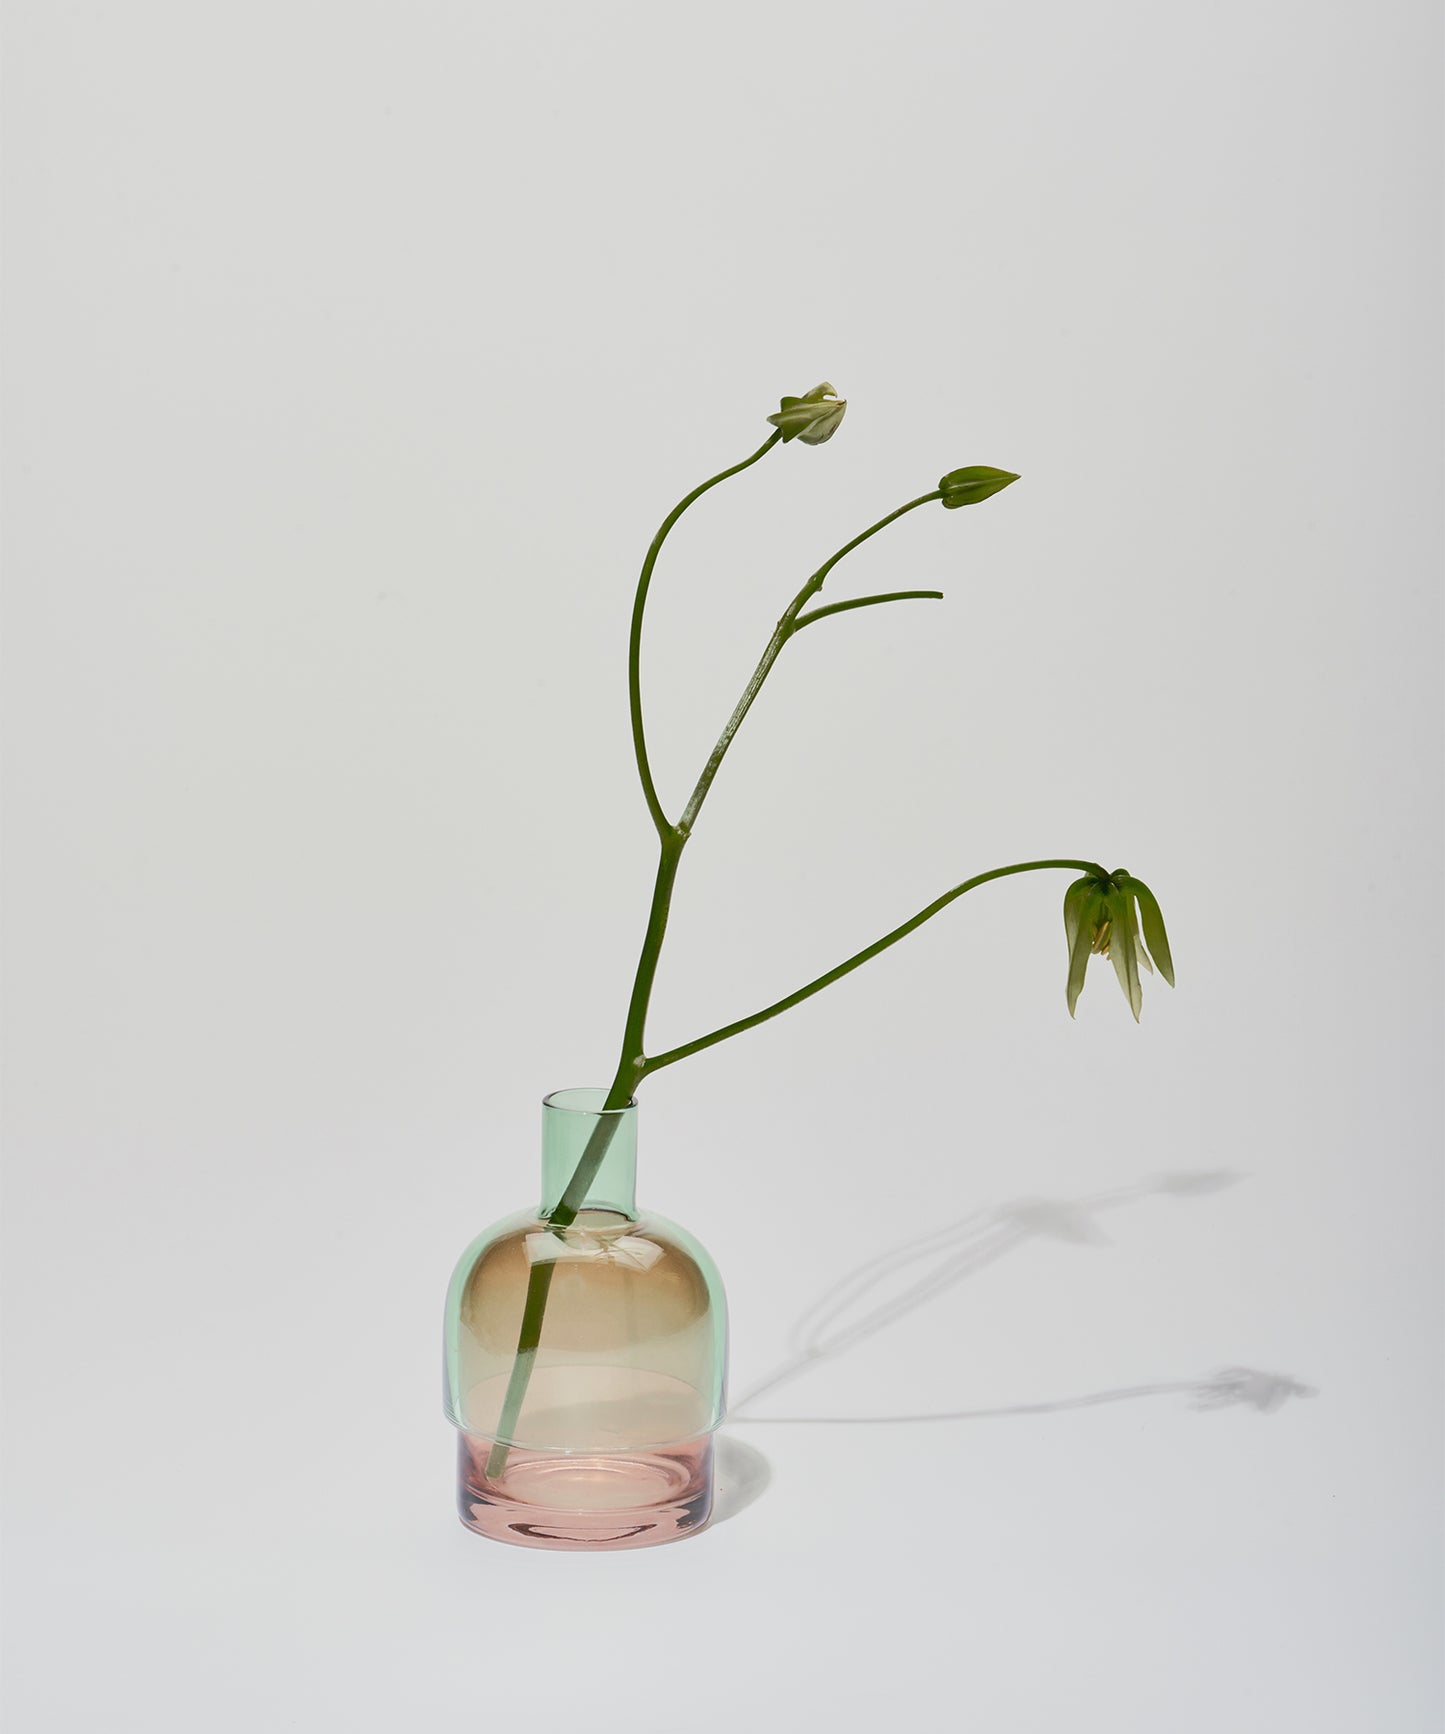 HOME UP-DOWN Creative Vase